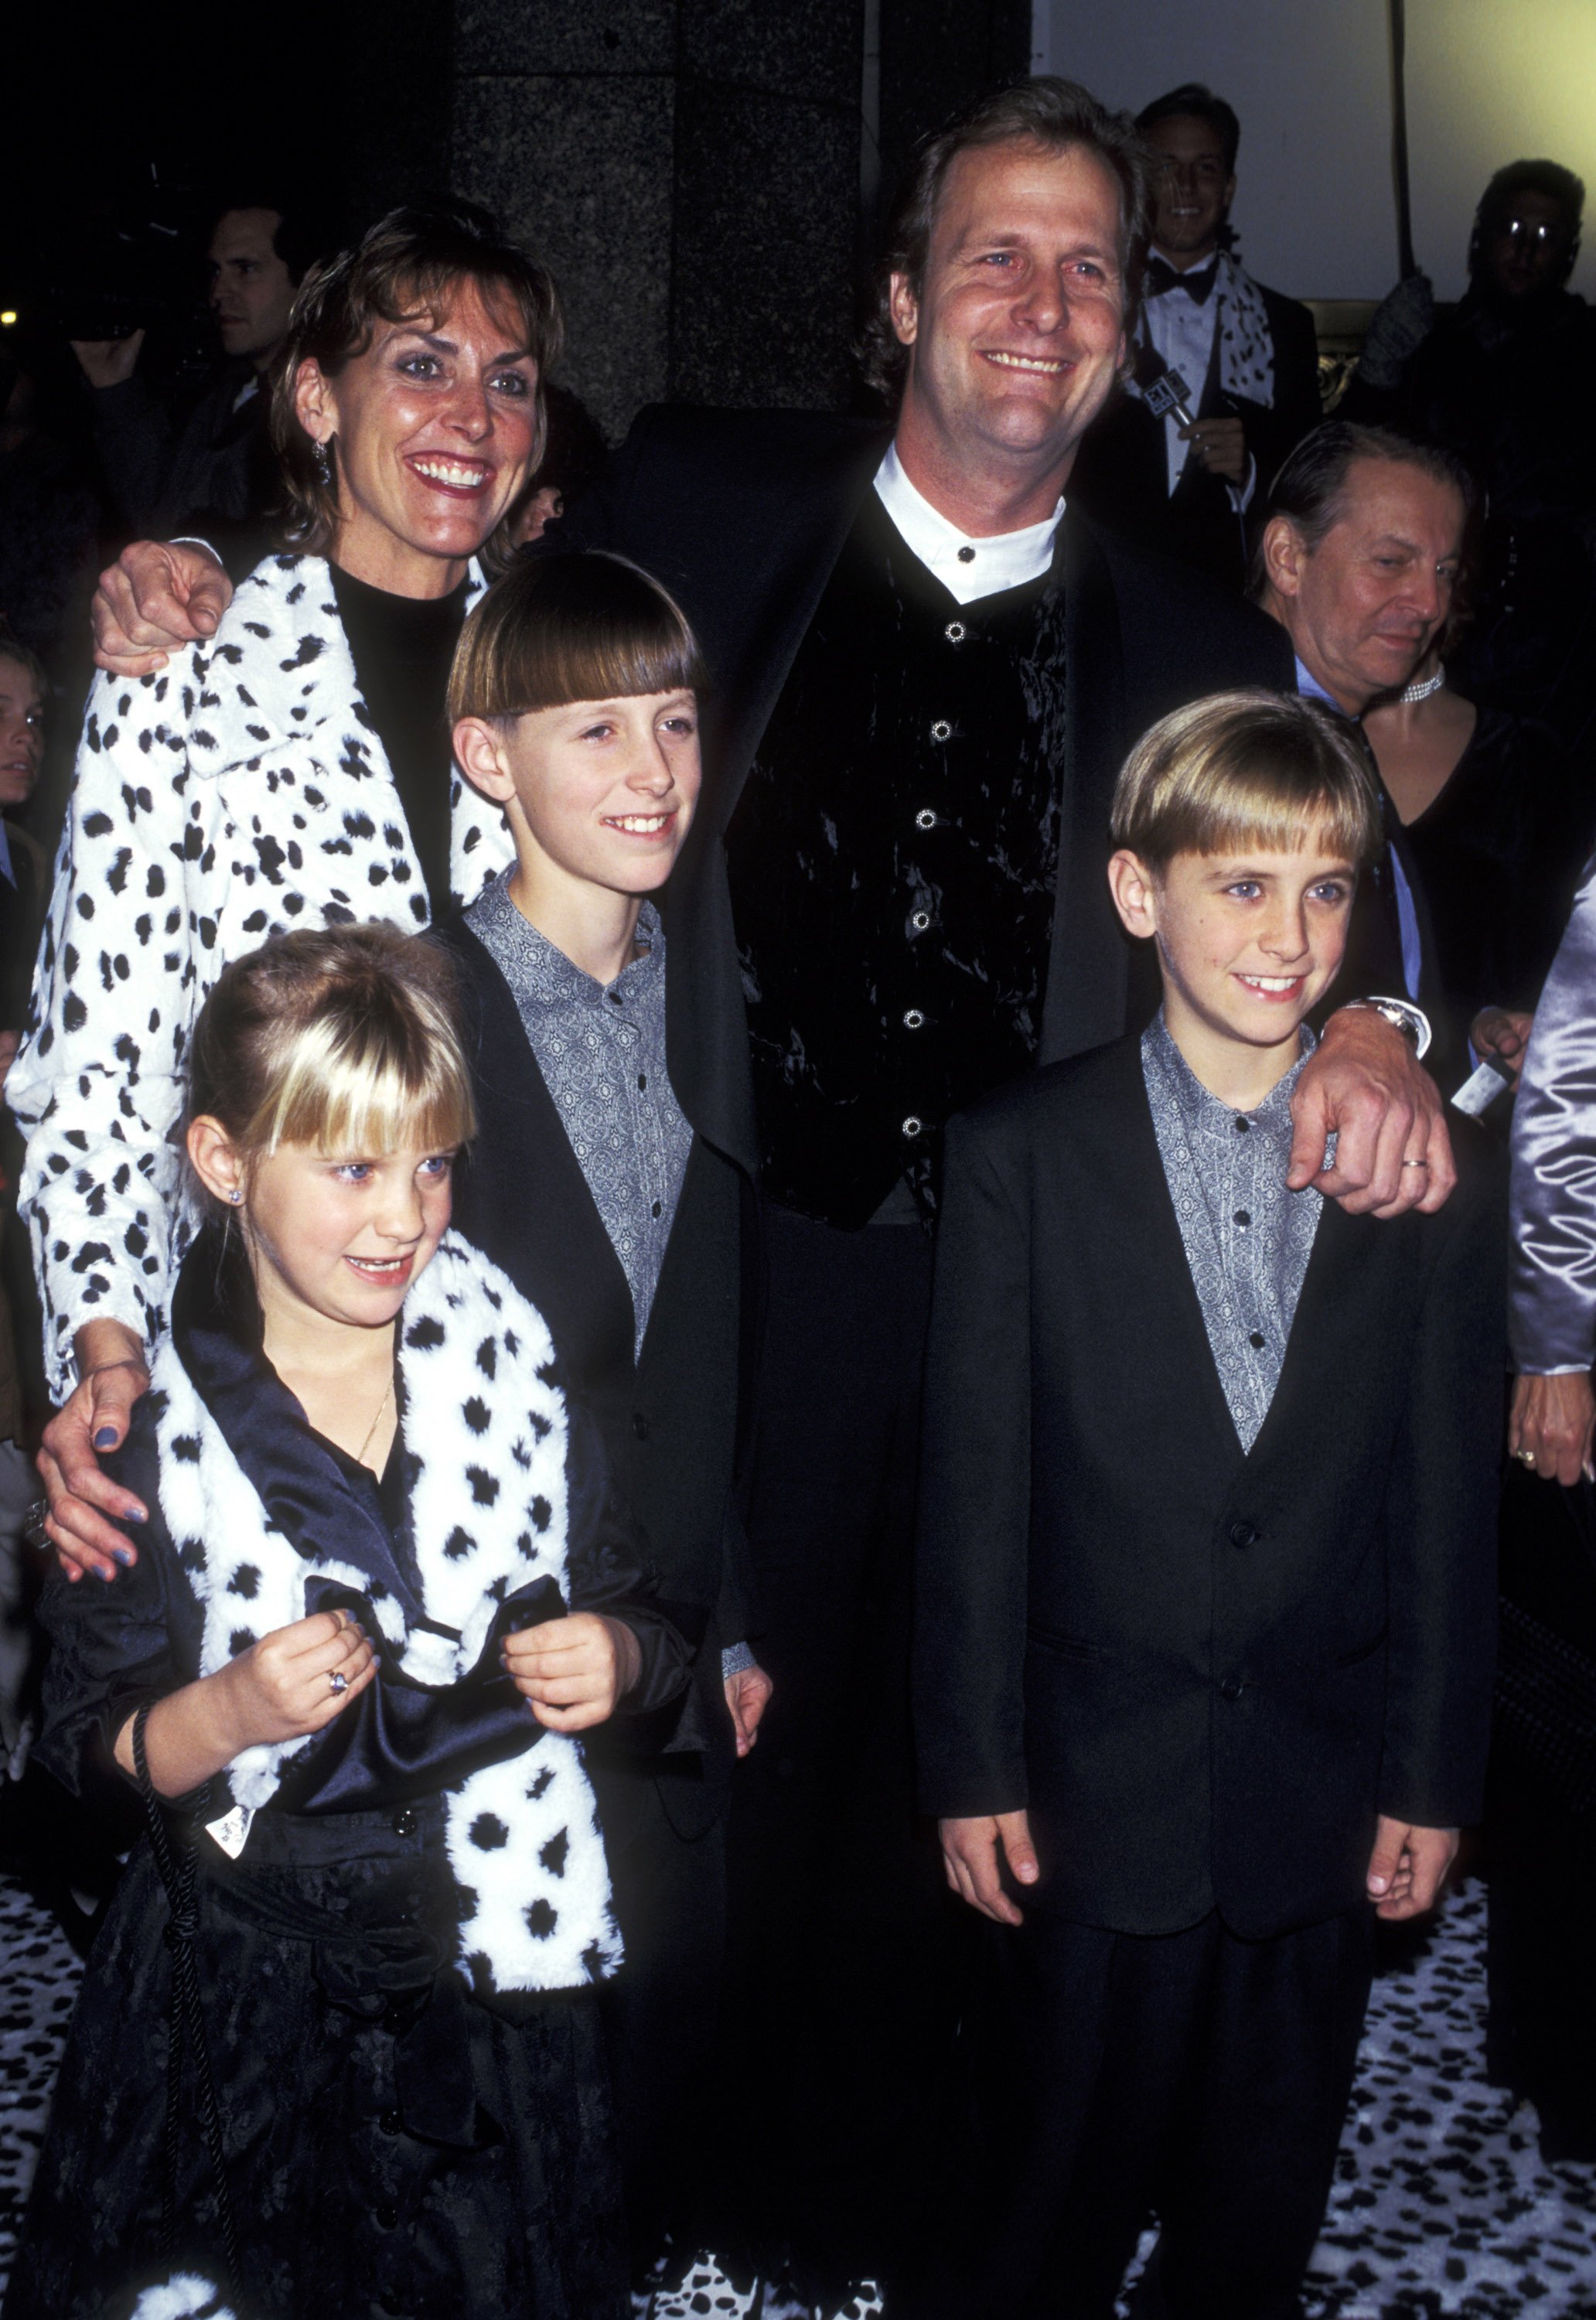 Jeff Daniels, Kathleen Treado, and their children Nellie, Benjamin, and Lucas Daniels at the New York premiere of "101 Dalmatians" on November 18, 1996. | Source: Ron Galella/Ron Galella Collection/Getty Images